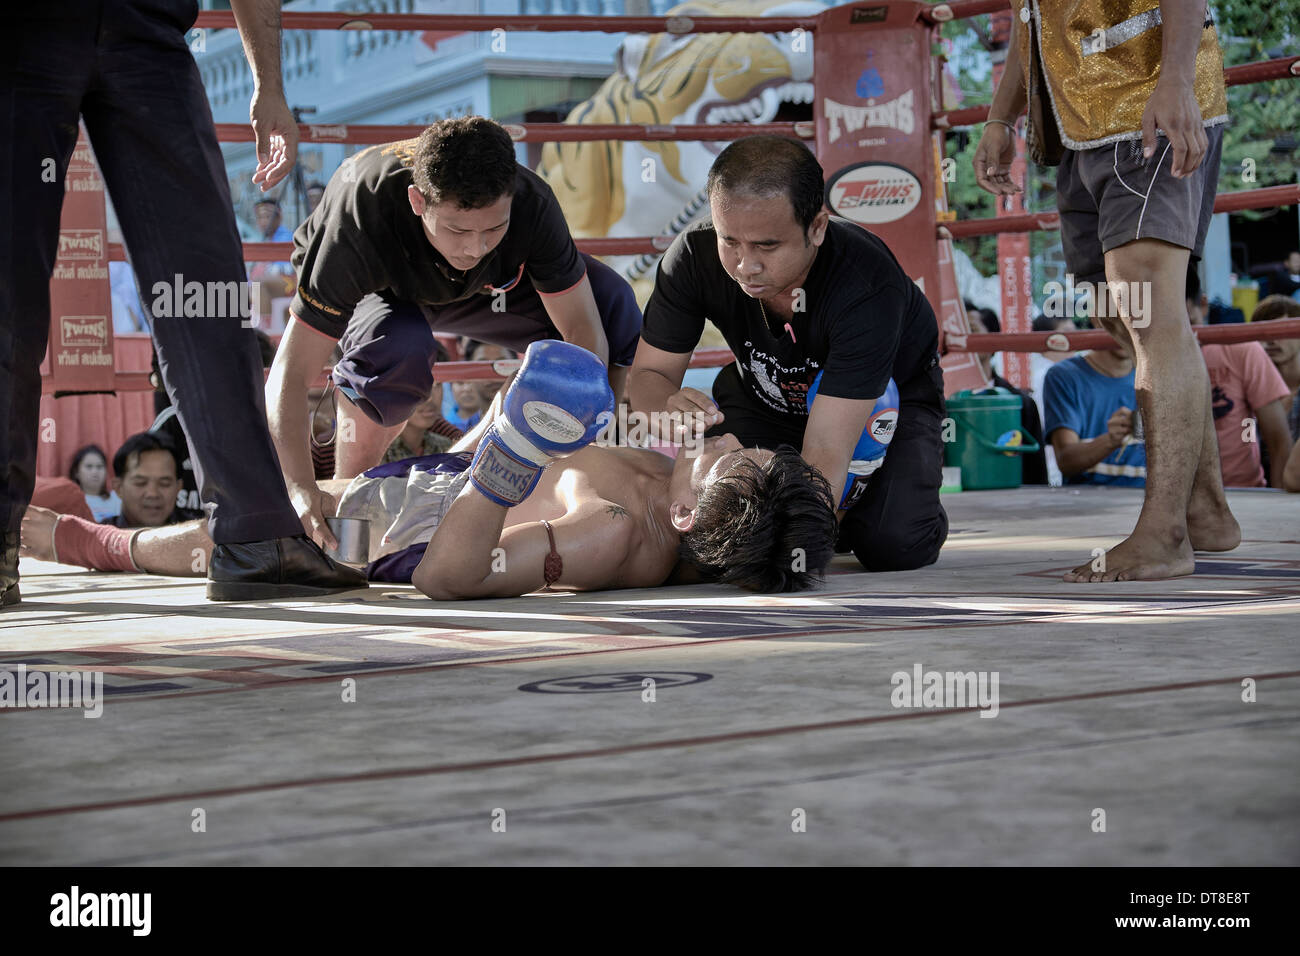 Muay Thai kick boxer receiving attention after a knock out blow. Thailand S. E. Asia. Stock Photo